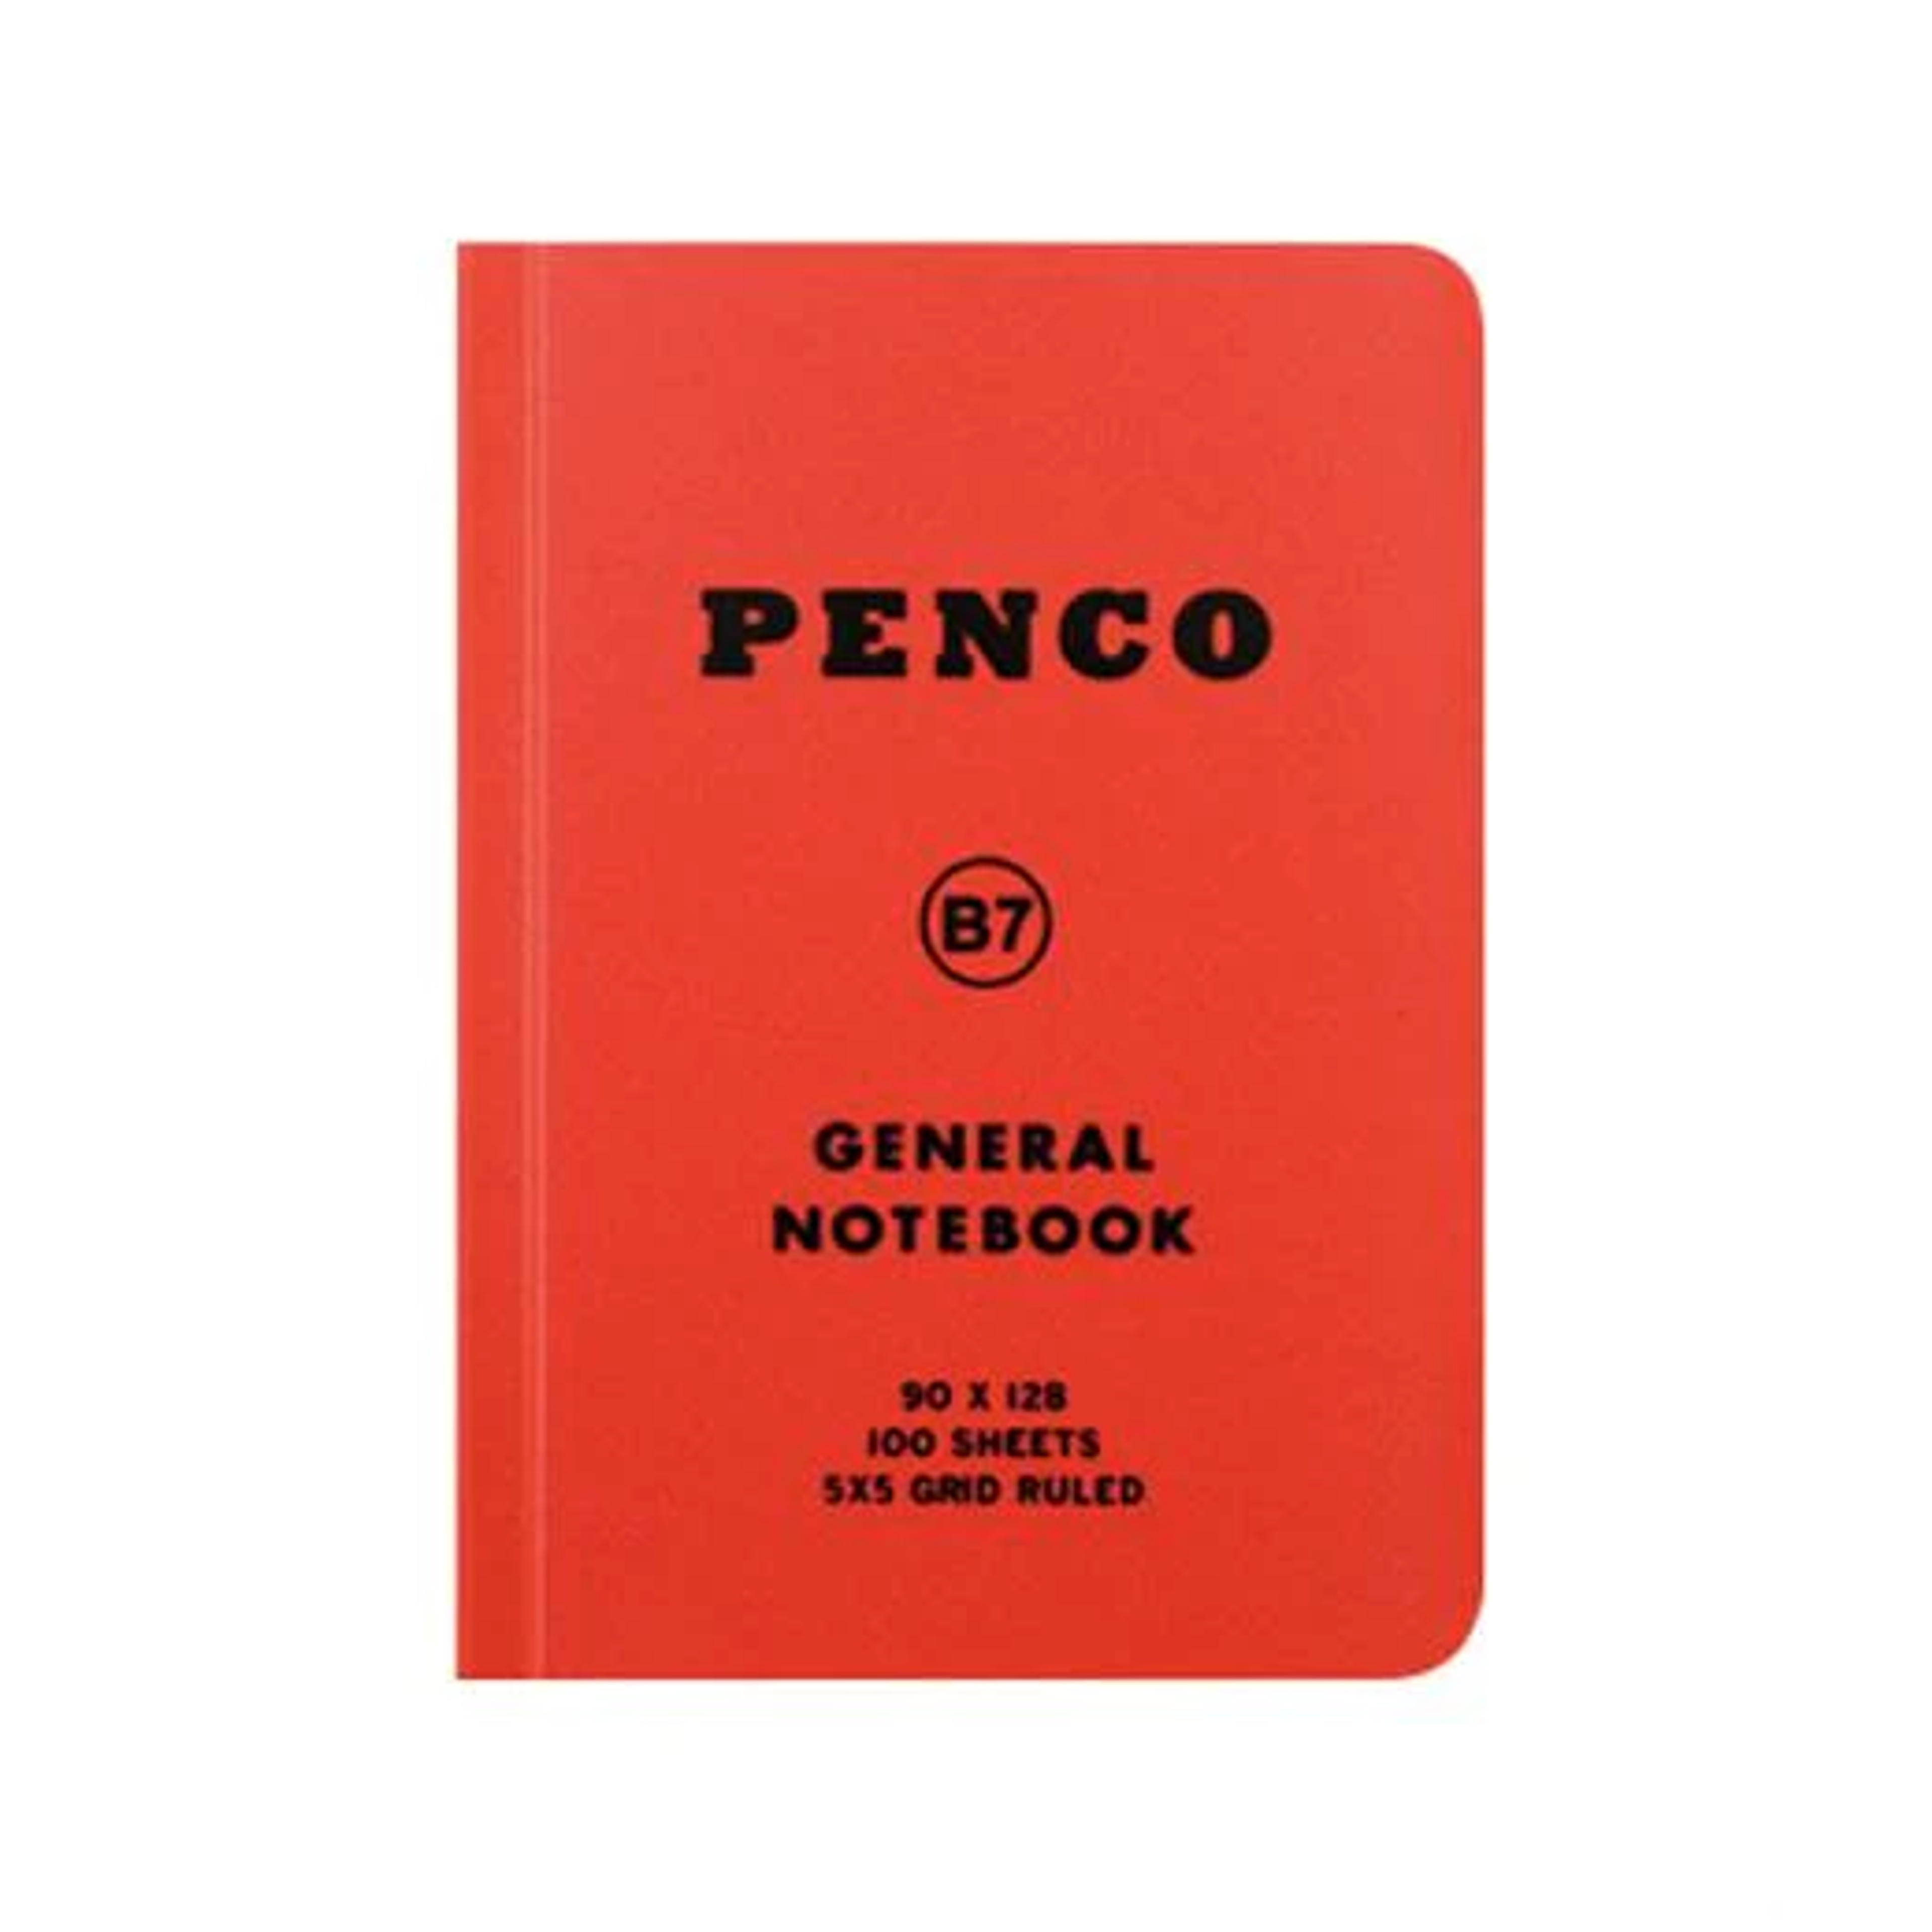 Soft PP Notebook/ B7 (PENCO) - Red